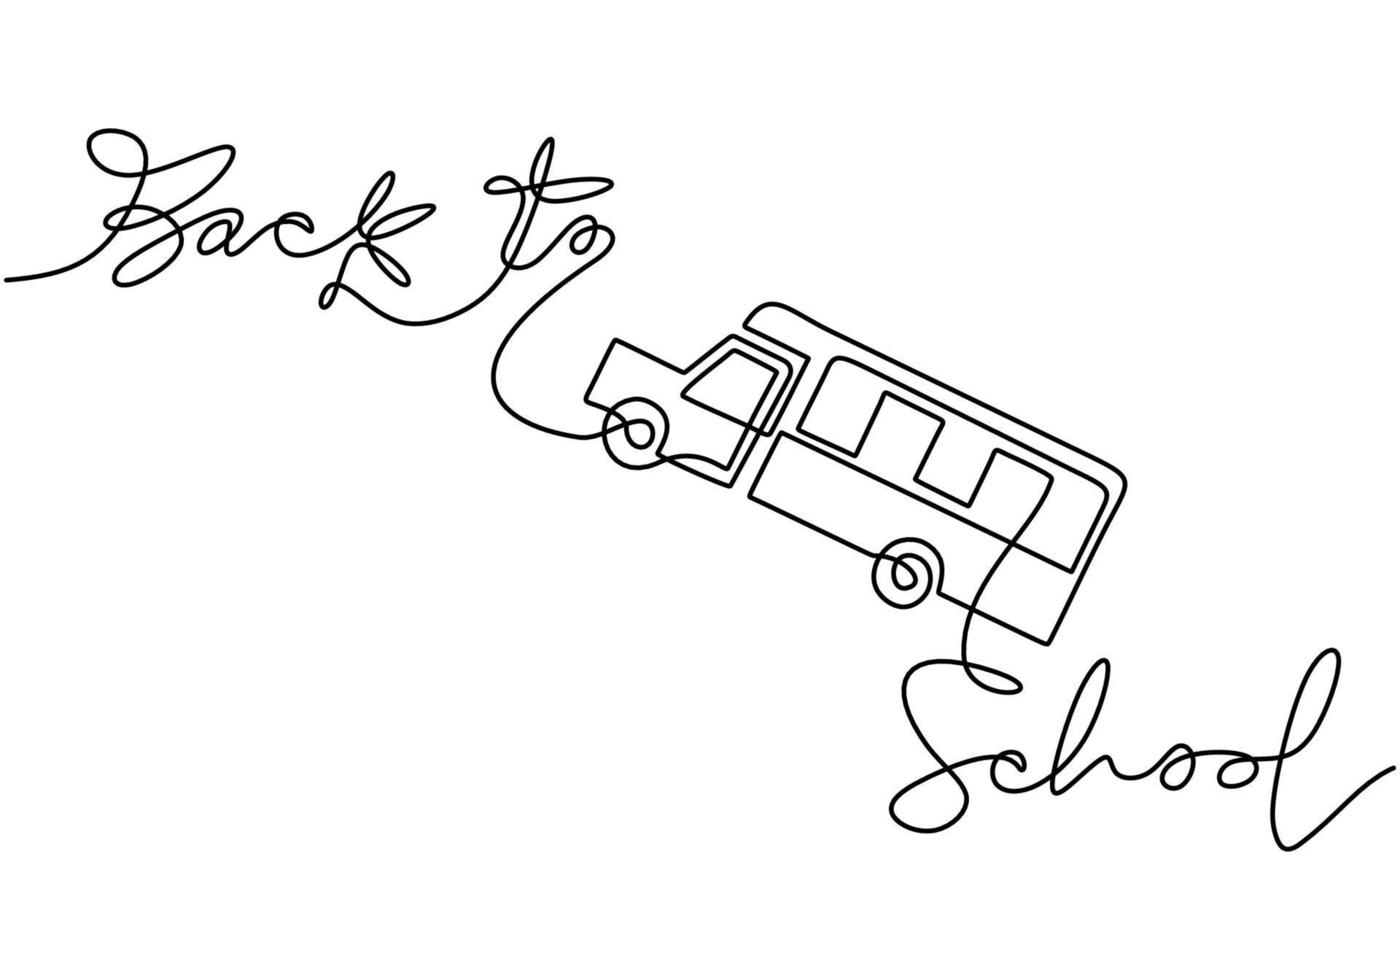 Continuous one line drawing of back to school handwritten words vector